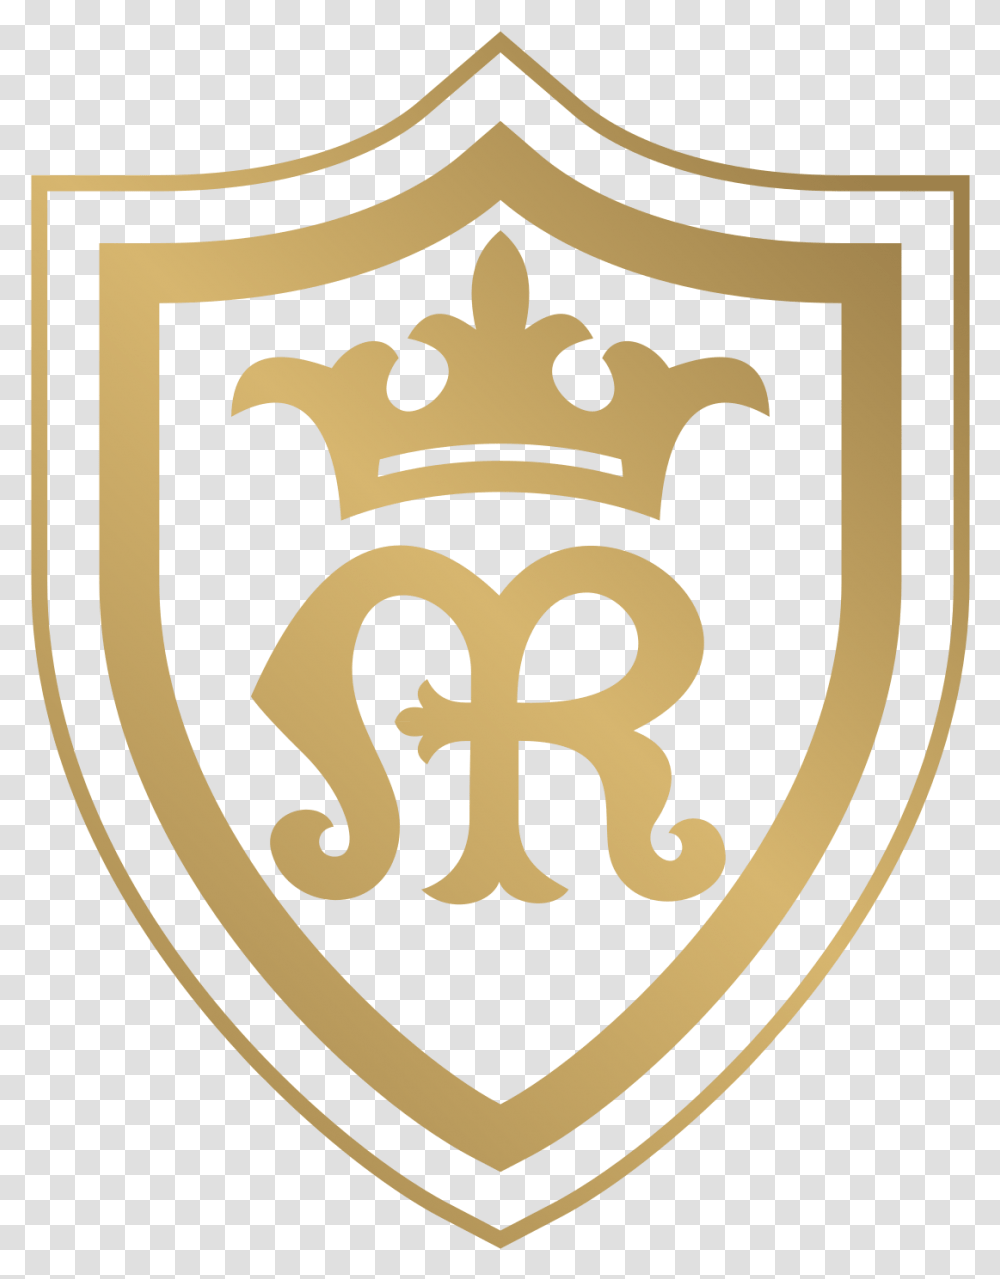 St Mary's School Cambridge Logo, Armor, Shield, Sweets, Food Transparent Png